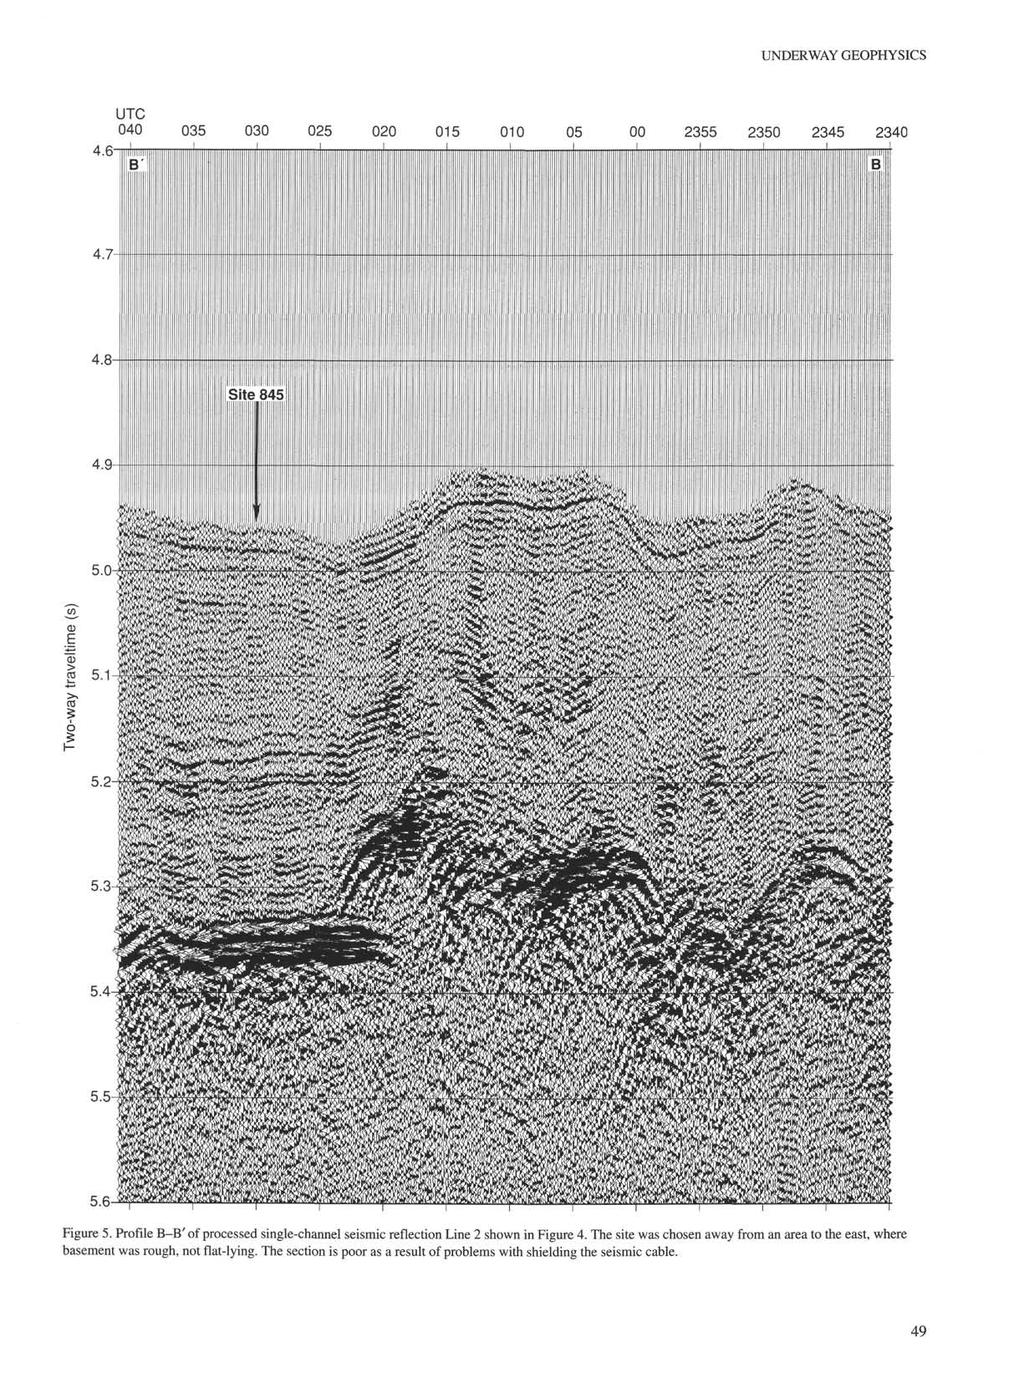 UNDERWAY GEOPHYSICS 040 035 0 025 020 015 010 05 00 2355 2350 2345 2340 5.6 Figure 5. Profile B-B' of processed single-channel seismic reflection Line 2 shown in Figure 4.